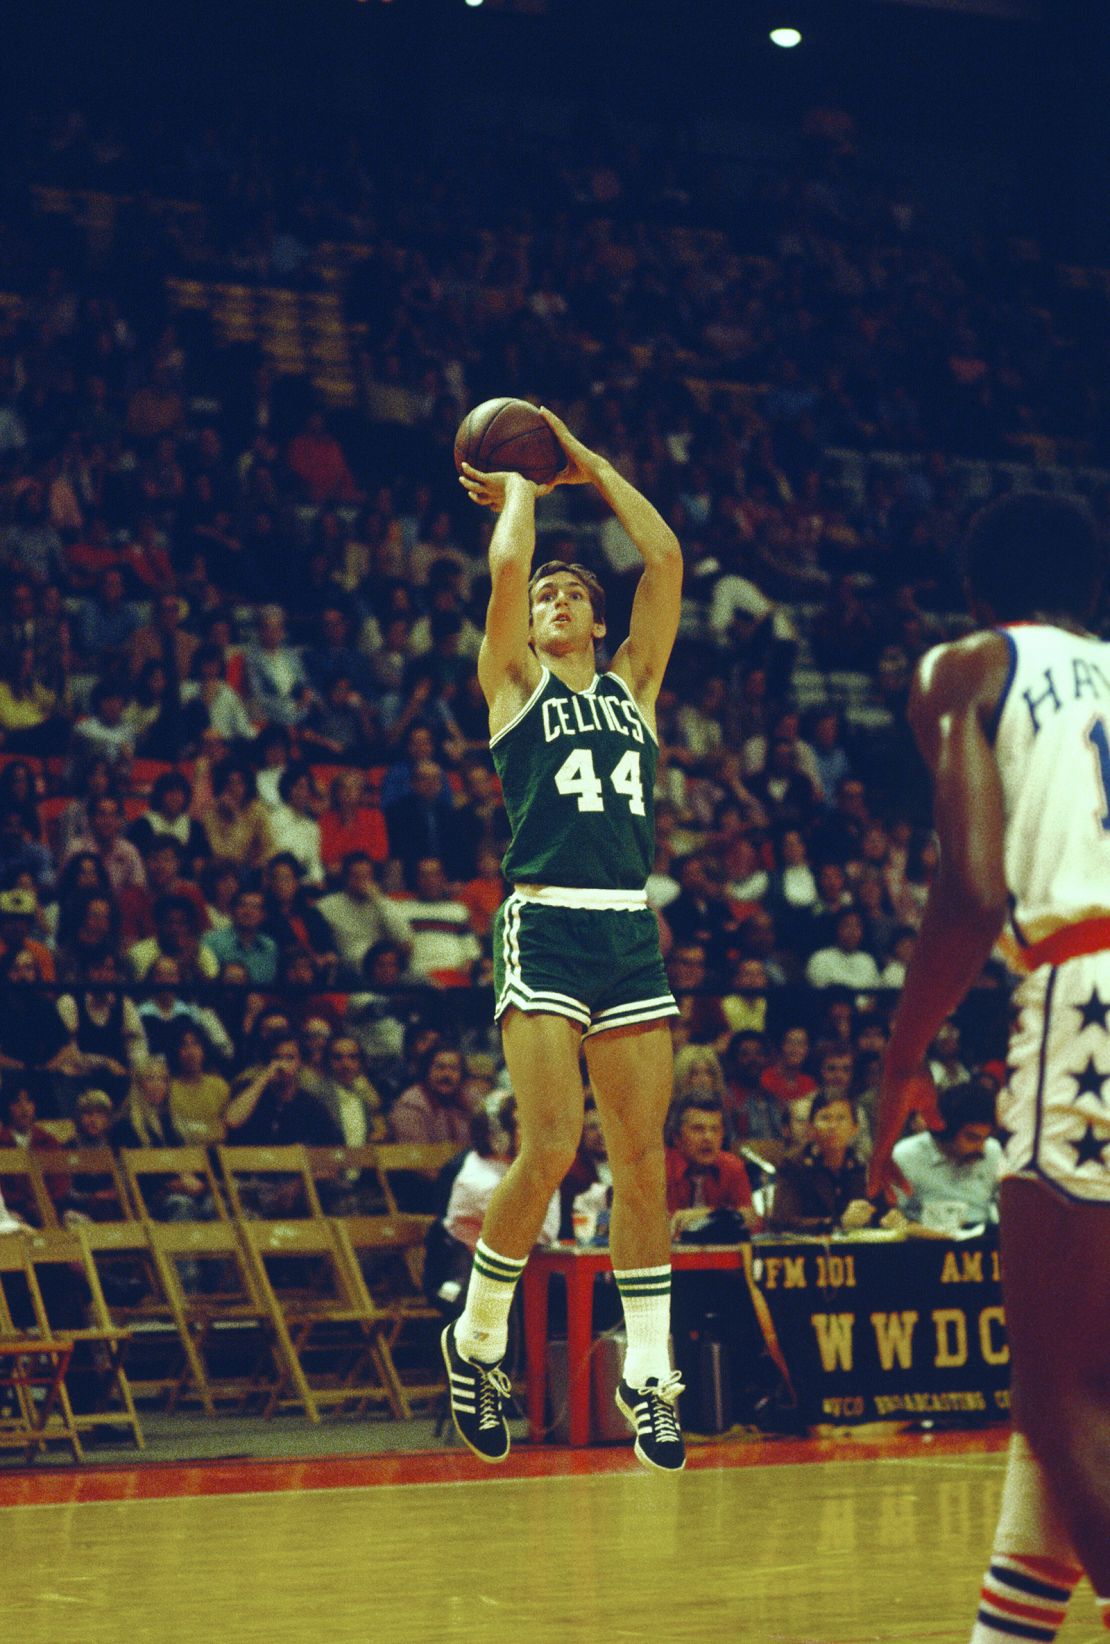 Playing for the Boston Celtics, Paul Westphal takes a shot against the Washington Bullets in 1975. 